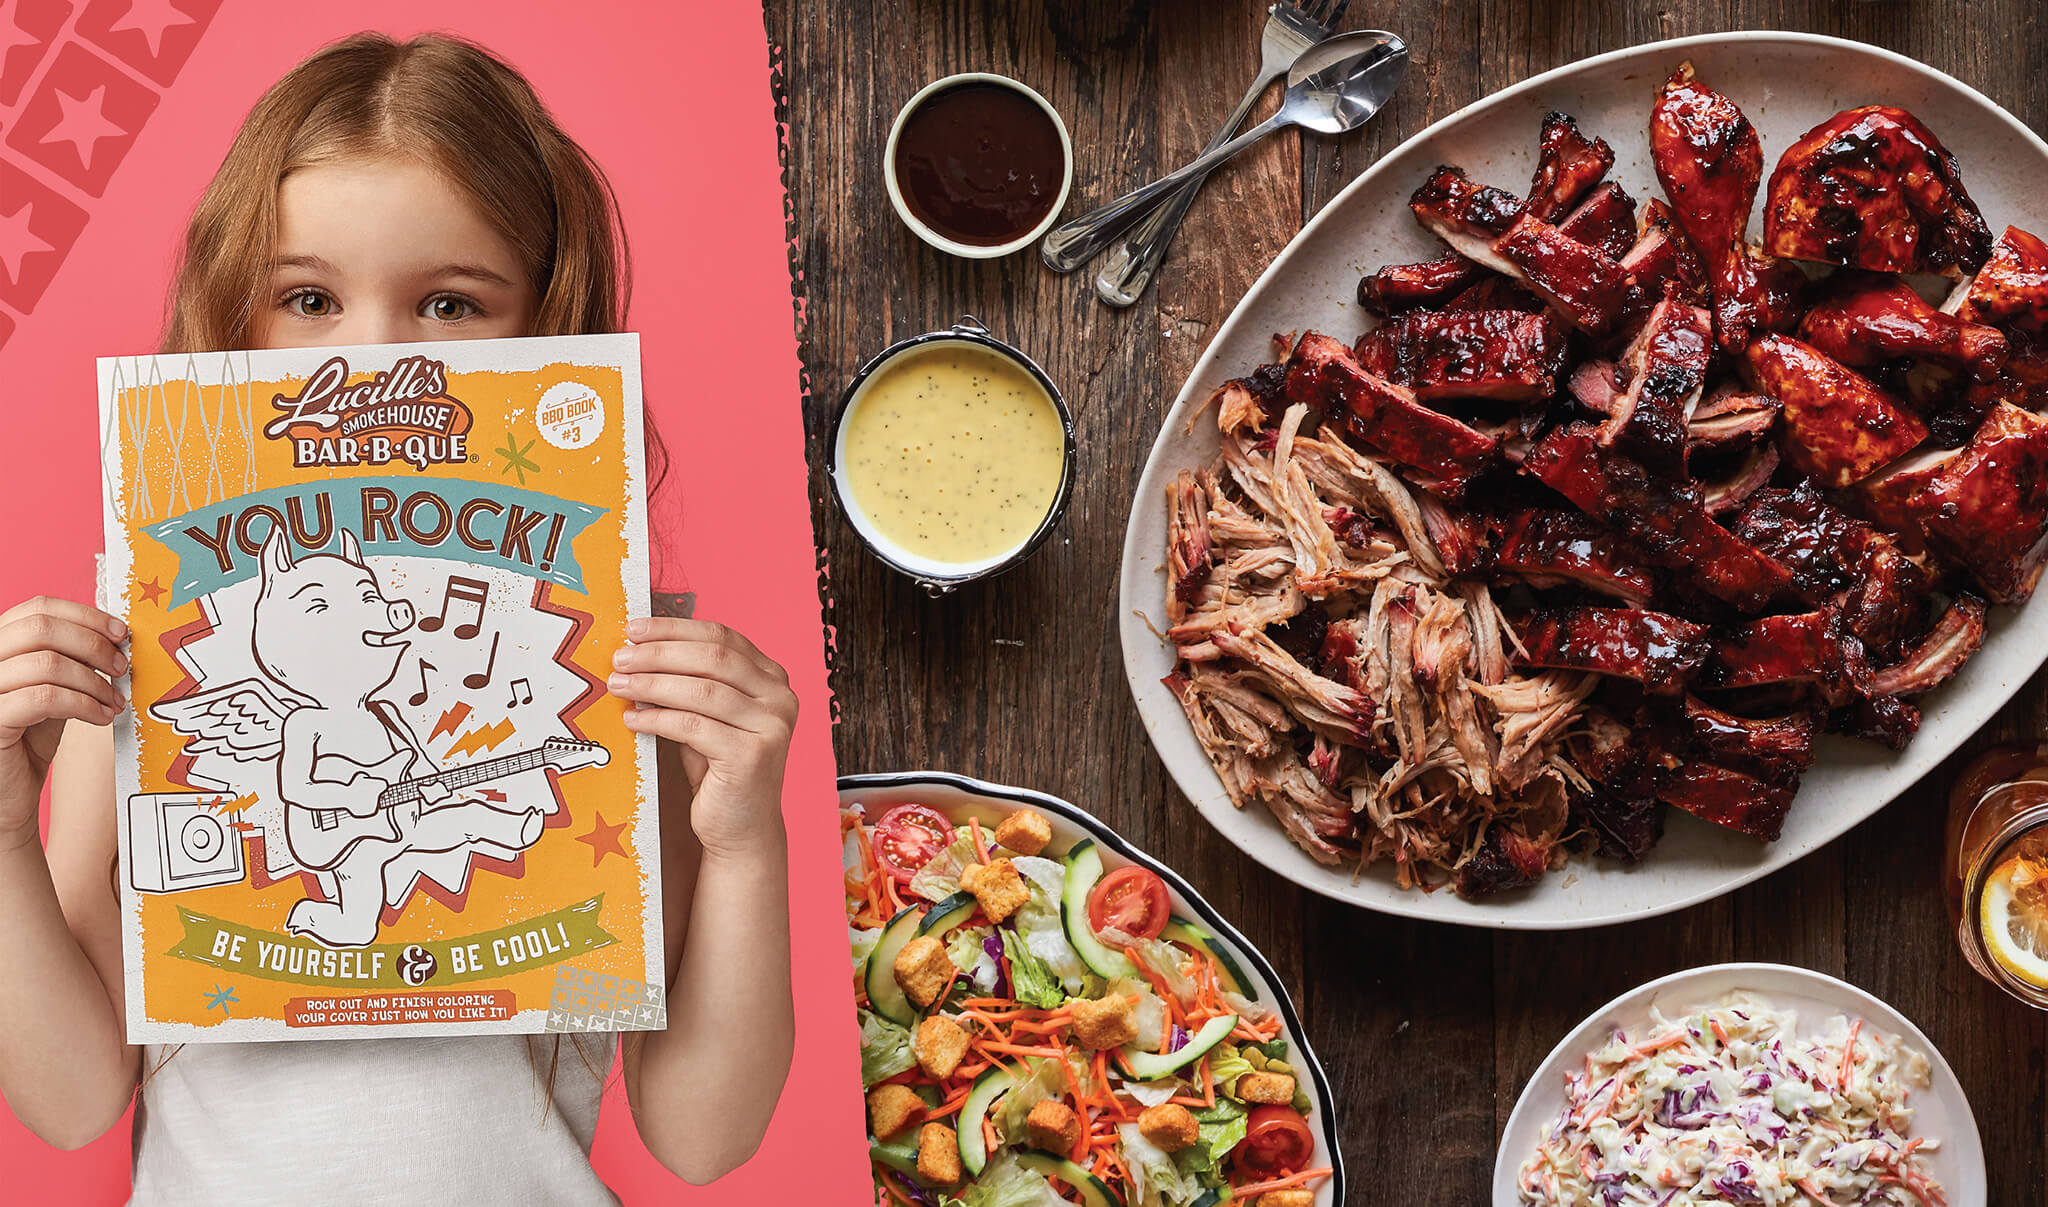 B-B-Q & A: 3 Questions with Joan Hanson, VP Marketing for Lucille’s Smokehouse Bar-B-Que